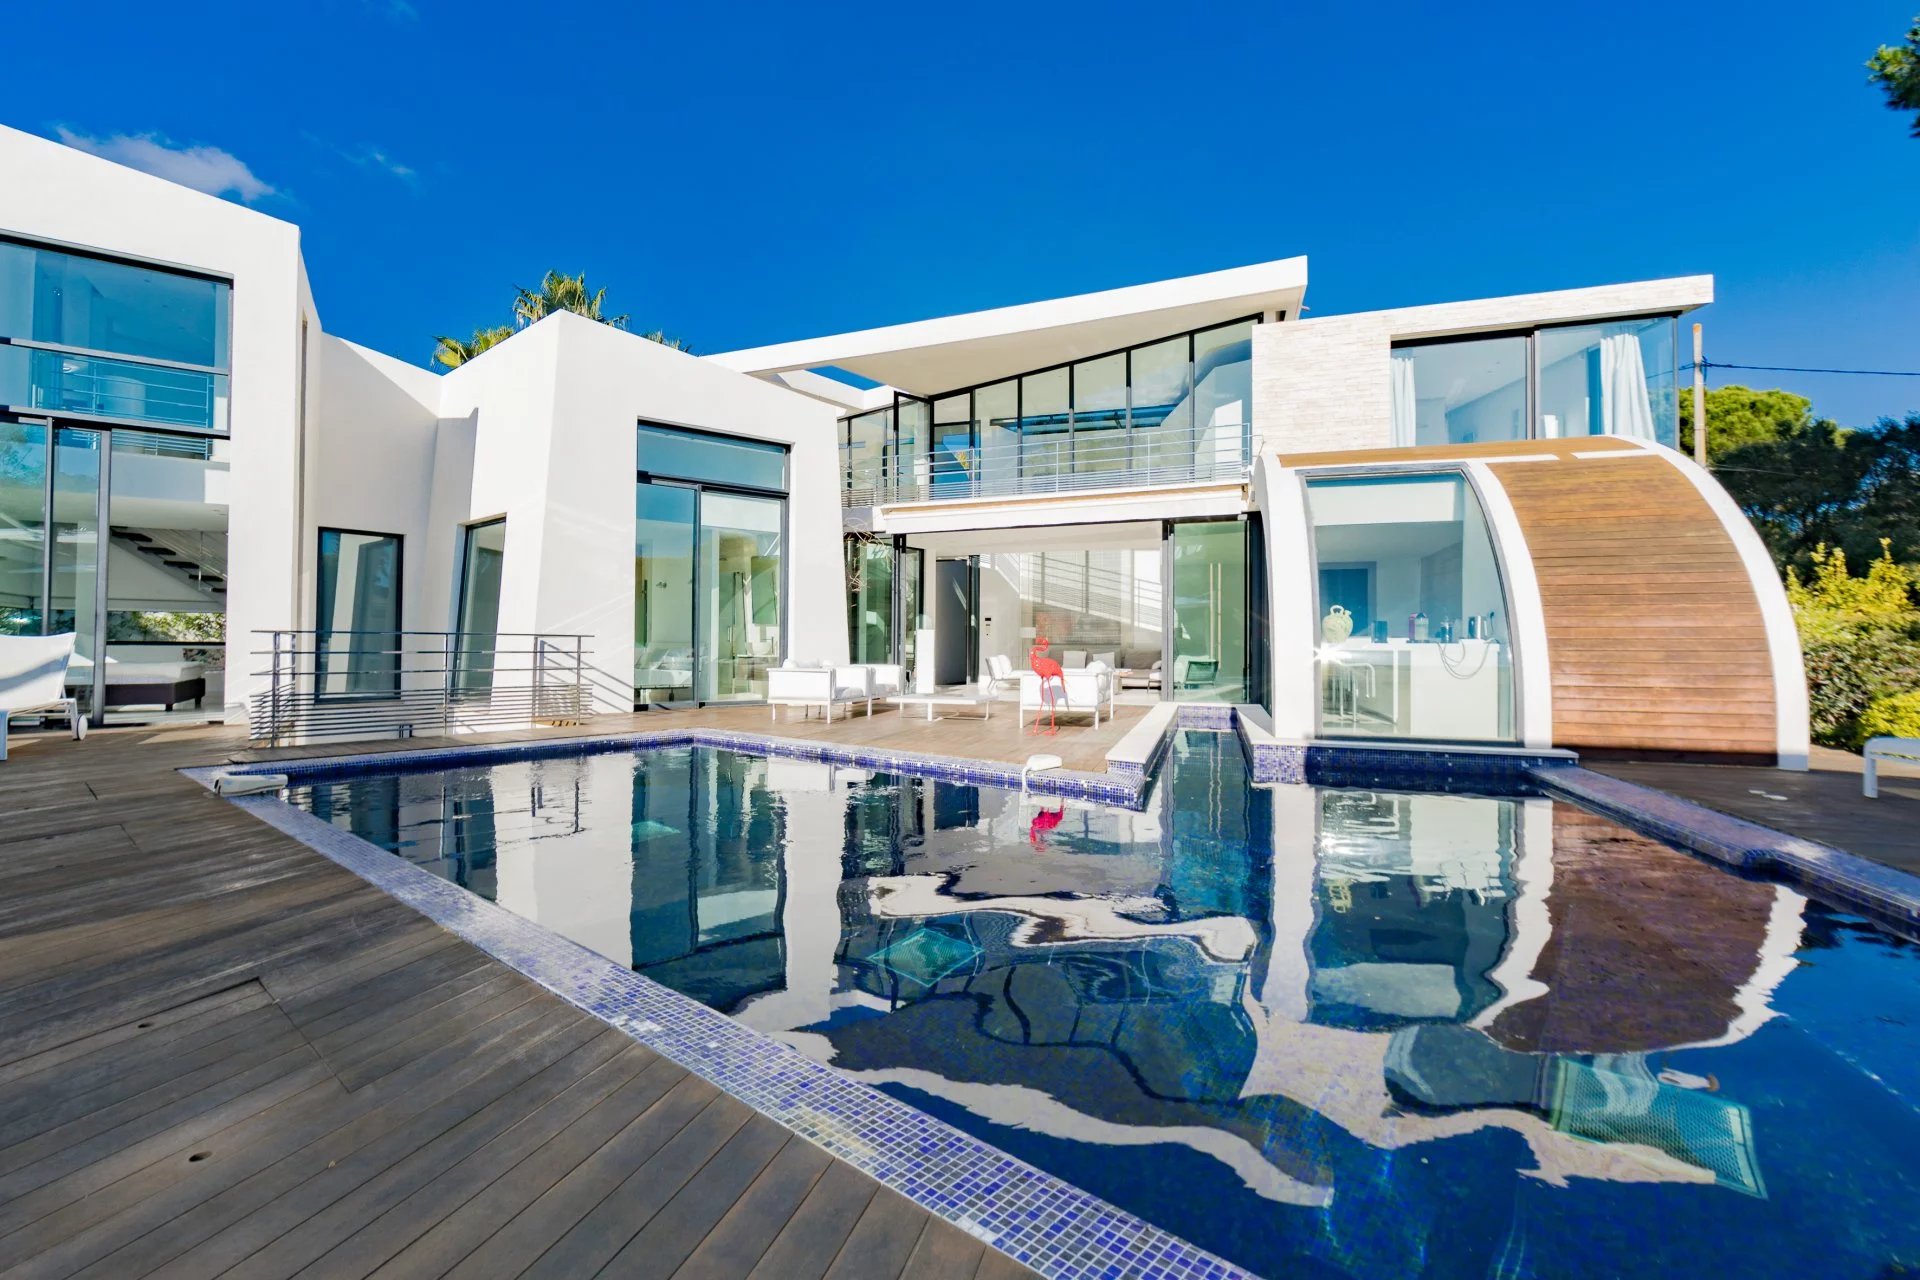 Contemporary villa ideally placed for the Pampelonne beaches and the popular Club 55.